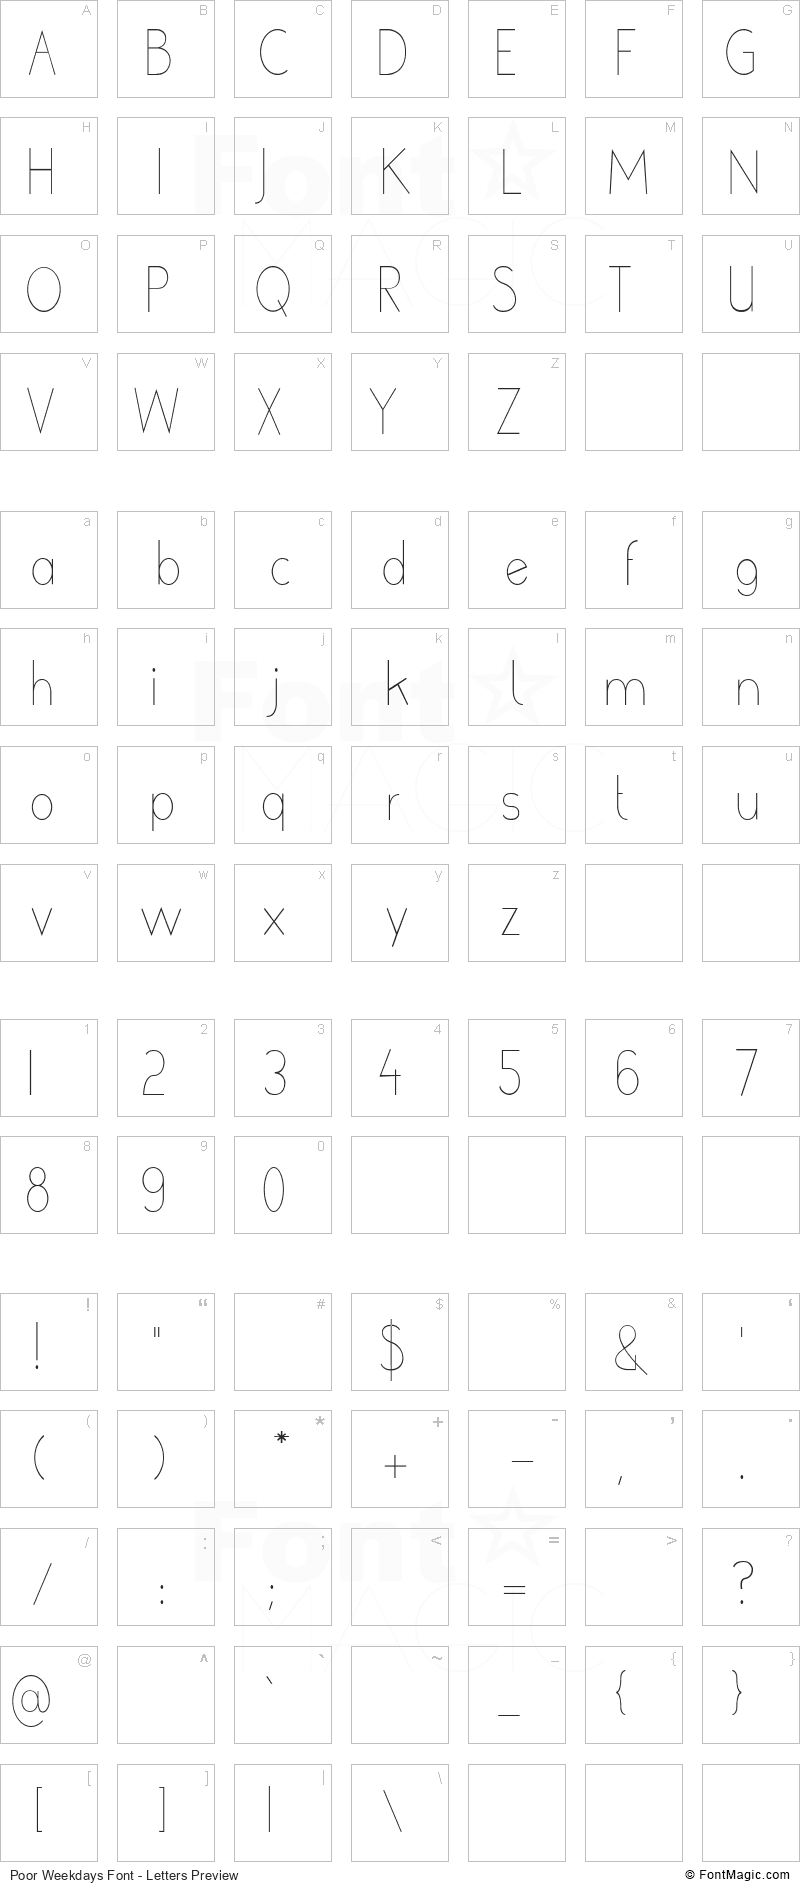 Poor Weekdays Font - All Latters Preview Chart